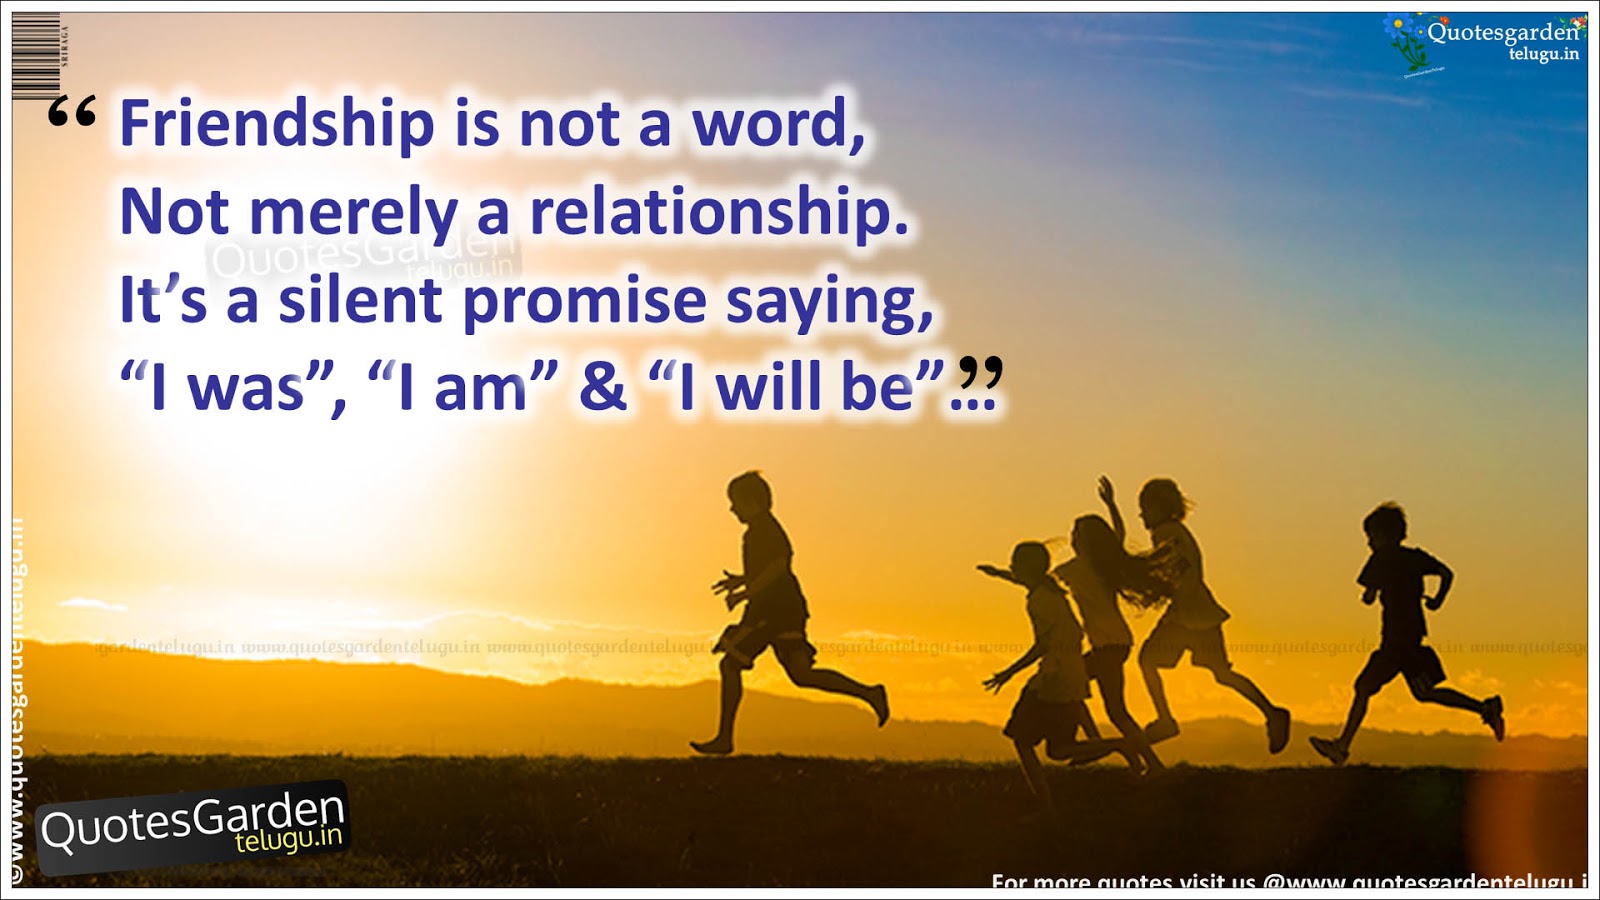 Nice Friendship Quotes HD wallpapers | QUOTES GARDEN TELUGU | Telugu Quotes  | English Quotes | Hindi Quotes |